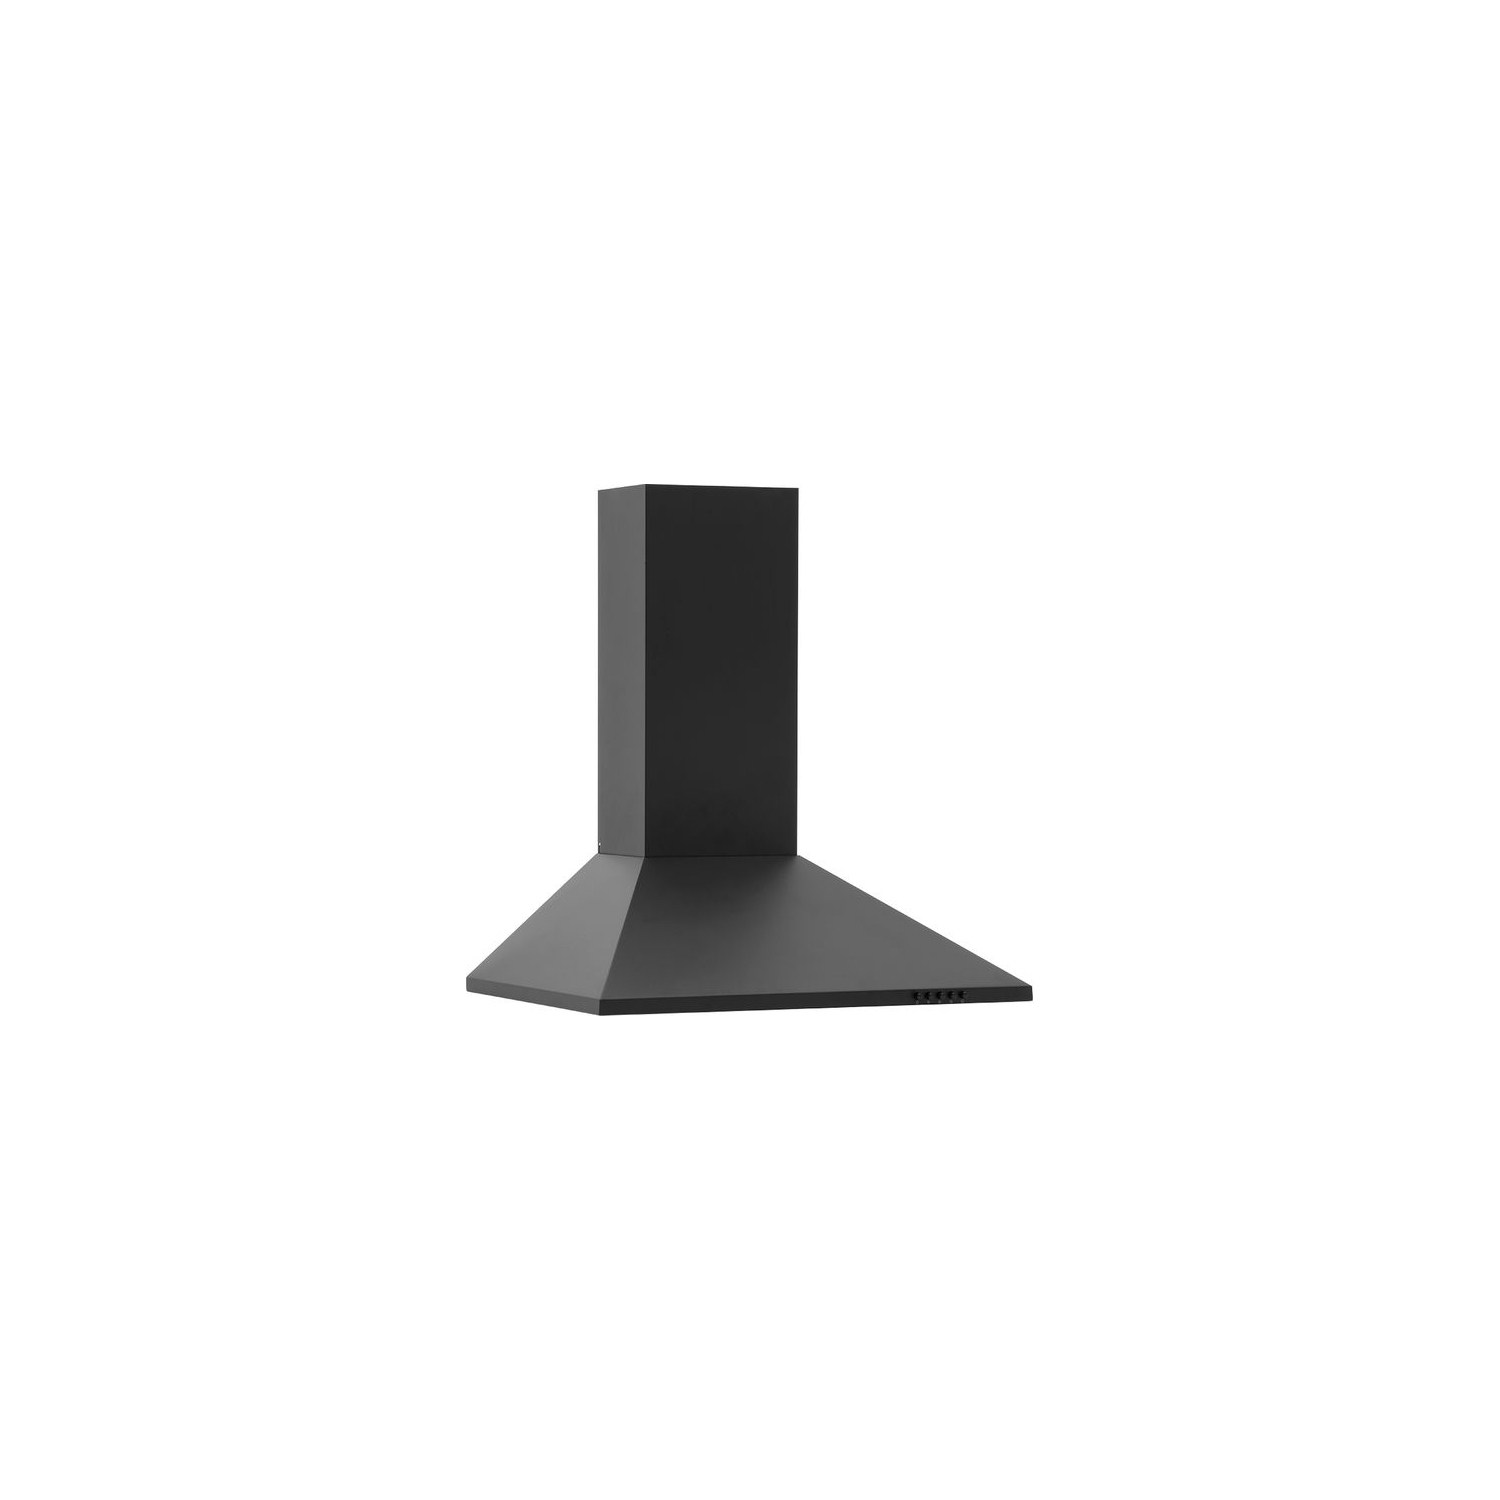 Candy 60cm Chimney Cooker - Black - C Rated - 1